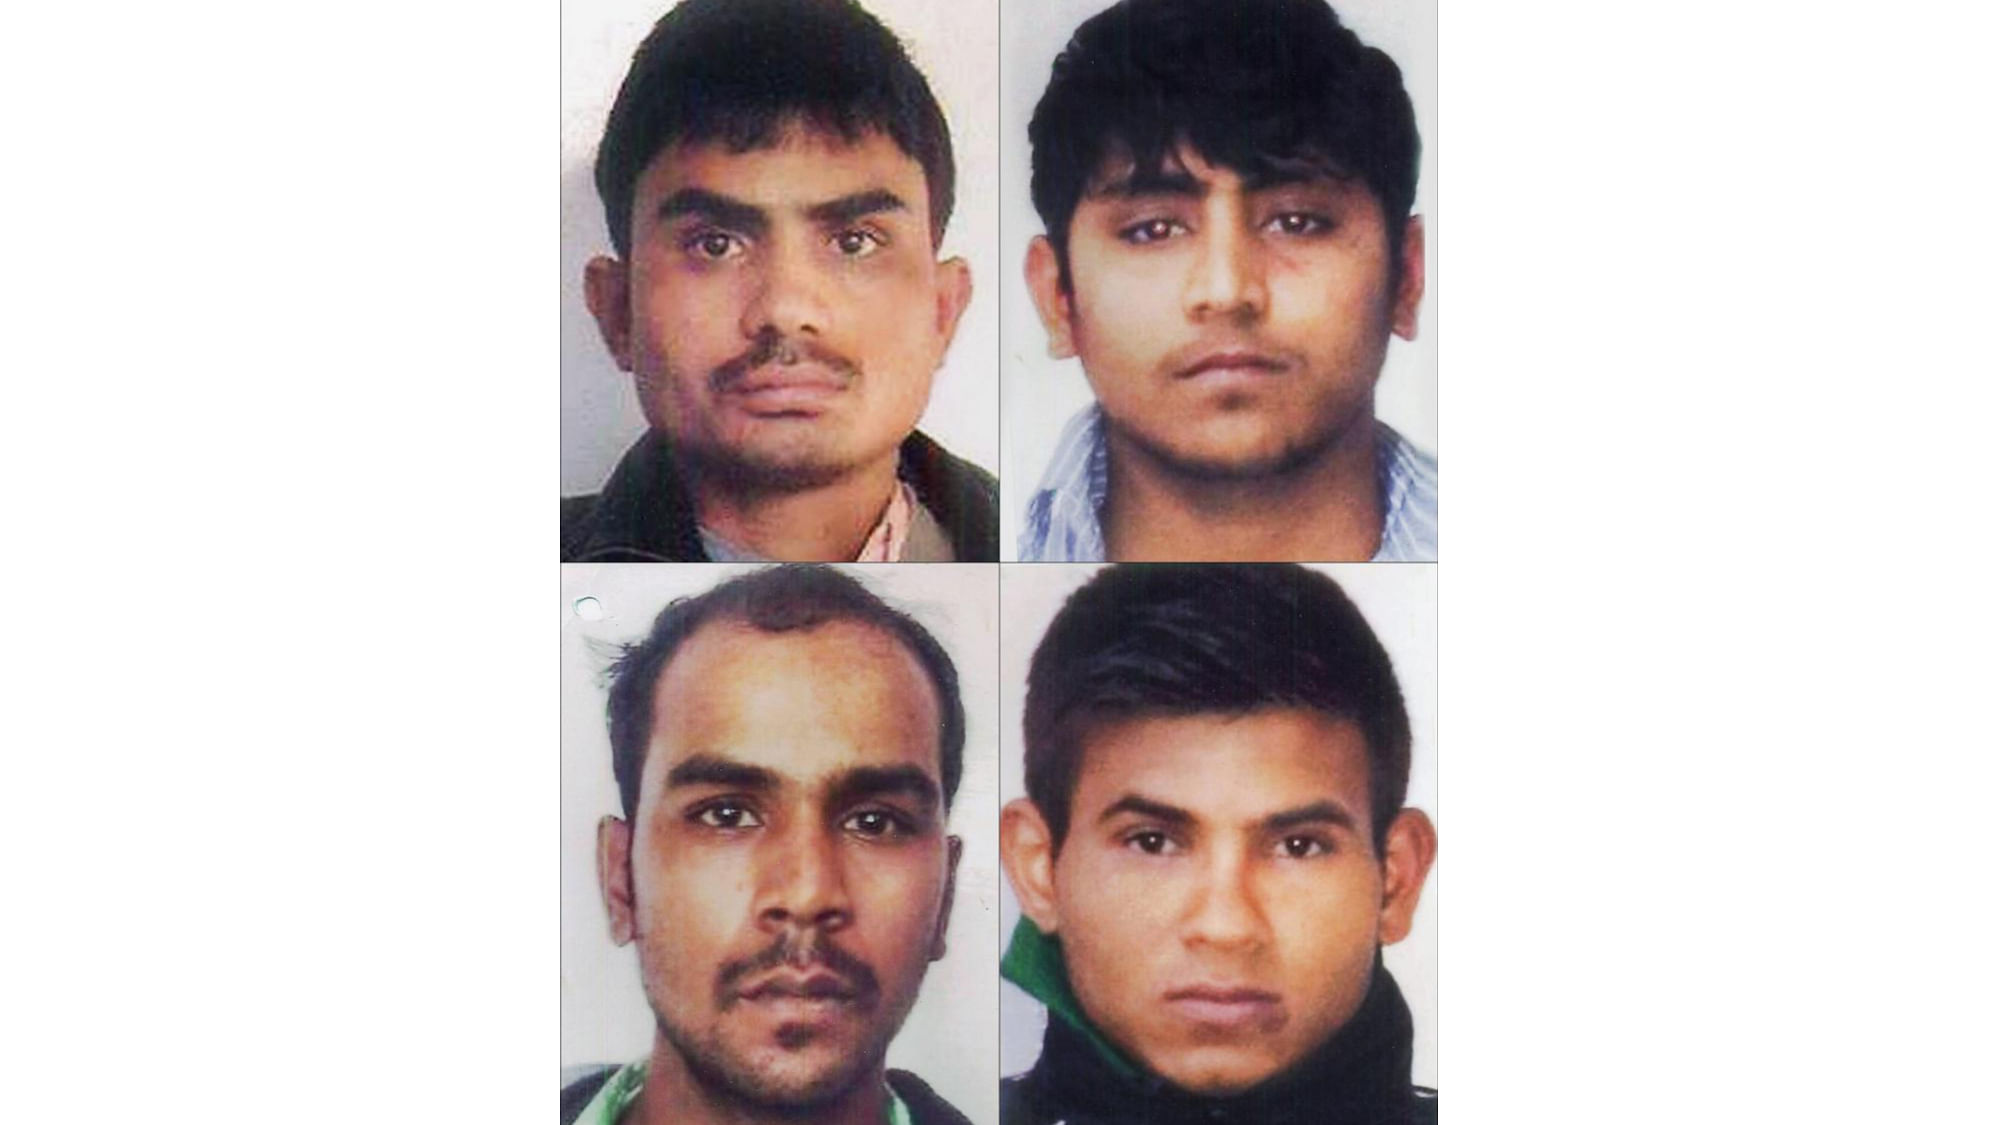 Nirbhaya gang rape case convicts, clockwise from top left, Akshay Thakur, Pawan Gupta,Vinay Sharma and Mukesh Singh. They are scheduled to be hanged on Friday morning, March 20 , 2020. (PTI Photo)